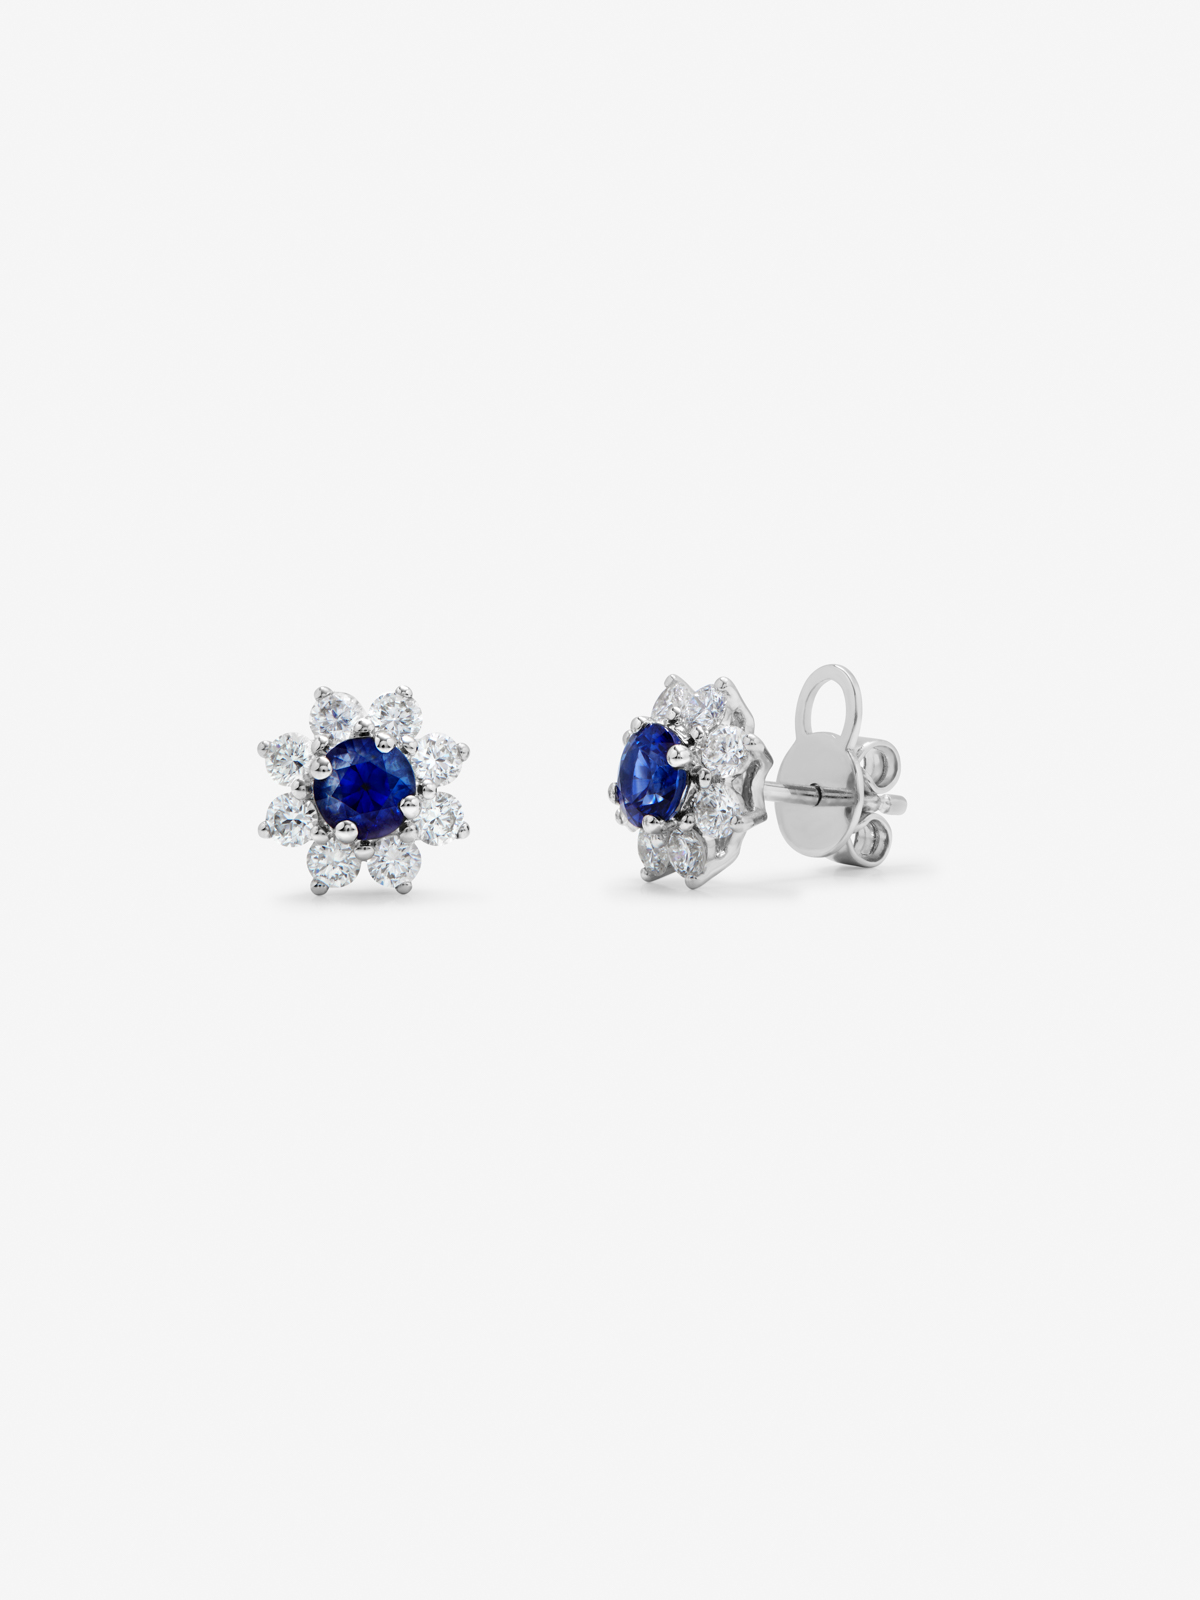 18K white gold earrings with blue zafiros in bright size of 0.92 cts and diamonds 0.76 CTS star -shaped